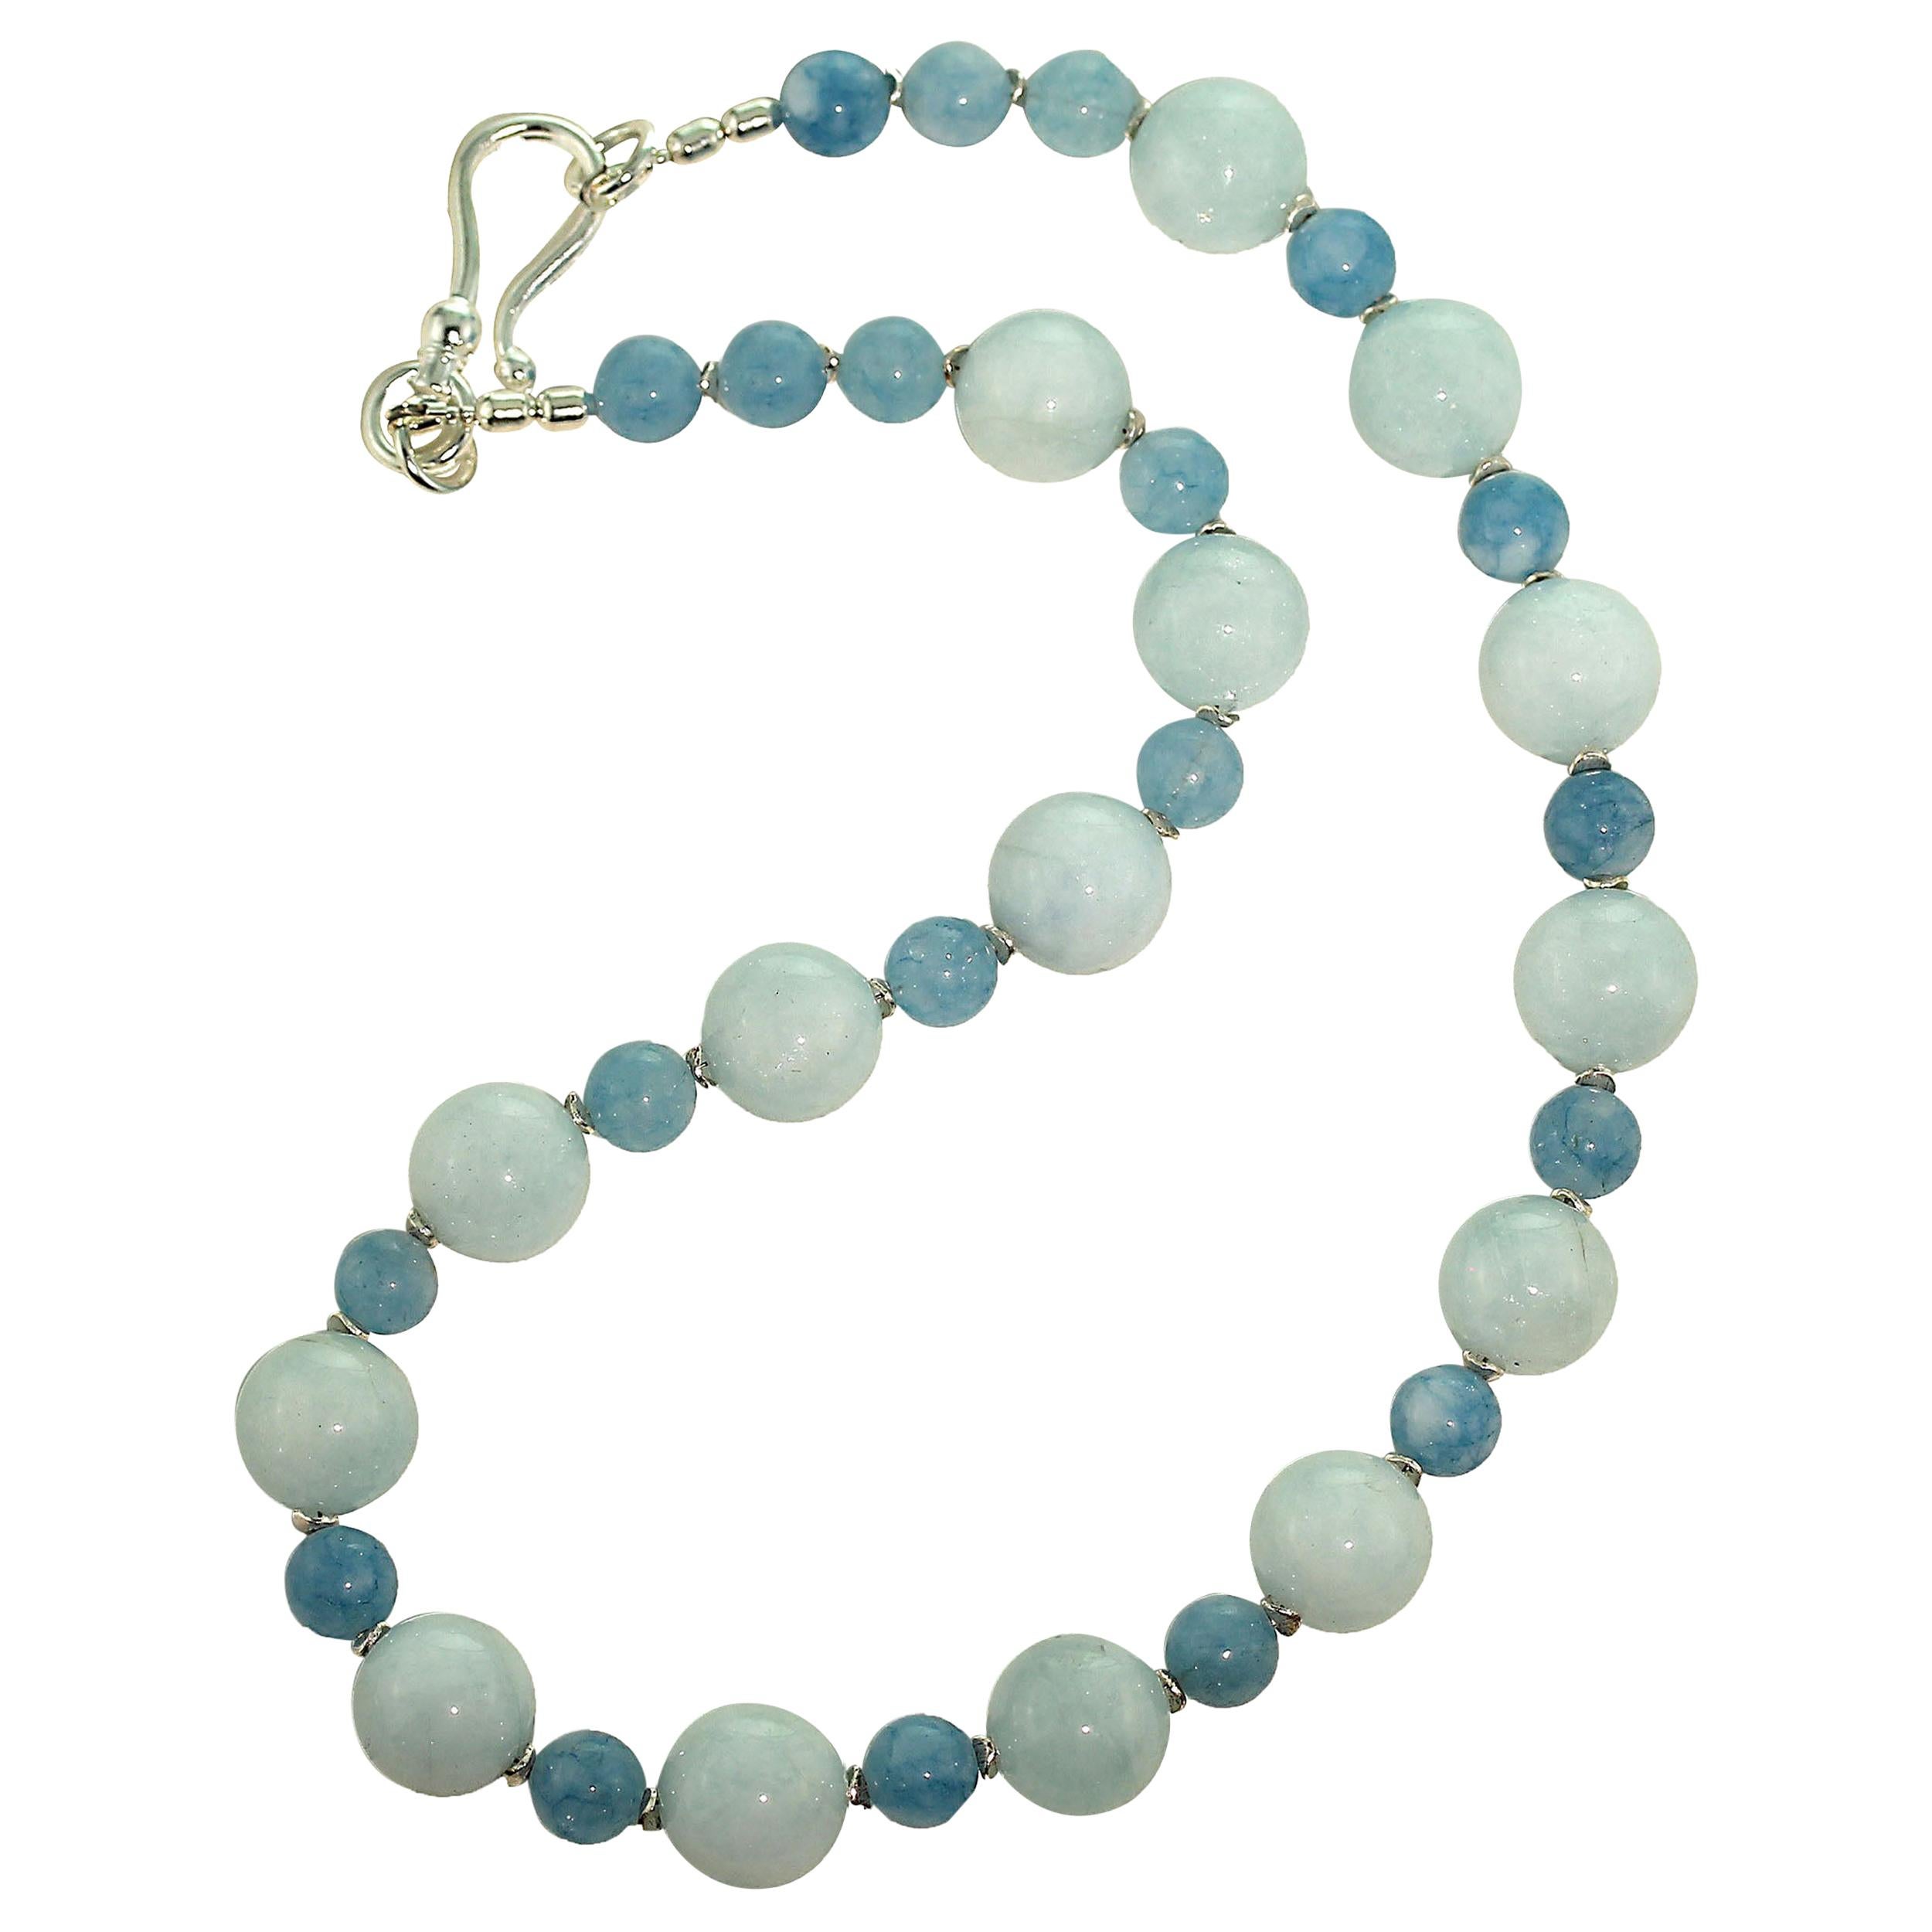 Unique, handmade necklace of genuine Aquamarine in two sizes and shapes. These gorgeous, highly polished Aquamarine are 15 MM and 10 MM and accented with silver tone flutters. Don't miss this elegant color combination of one of our favorite